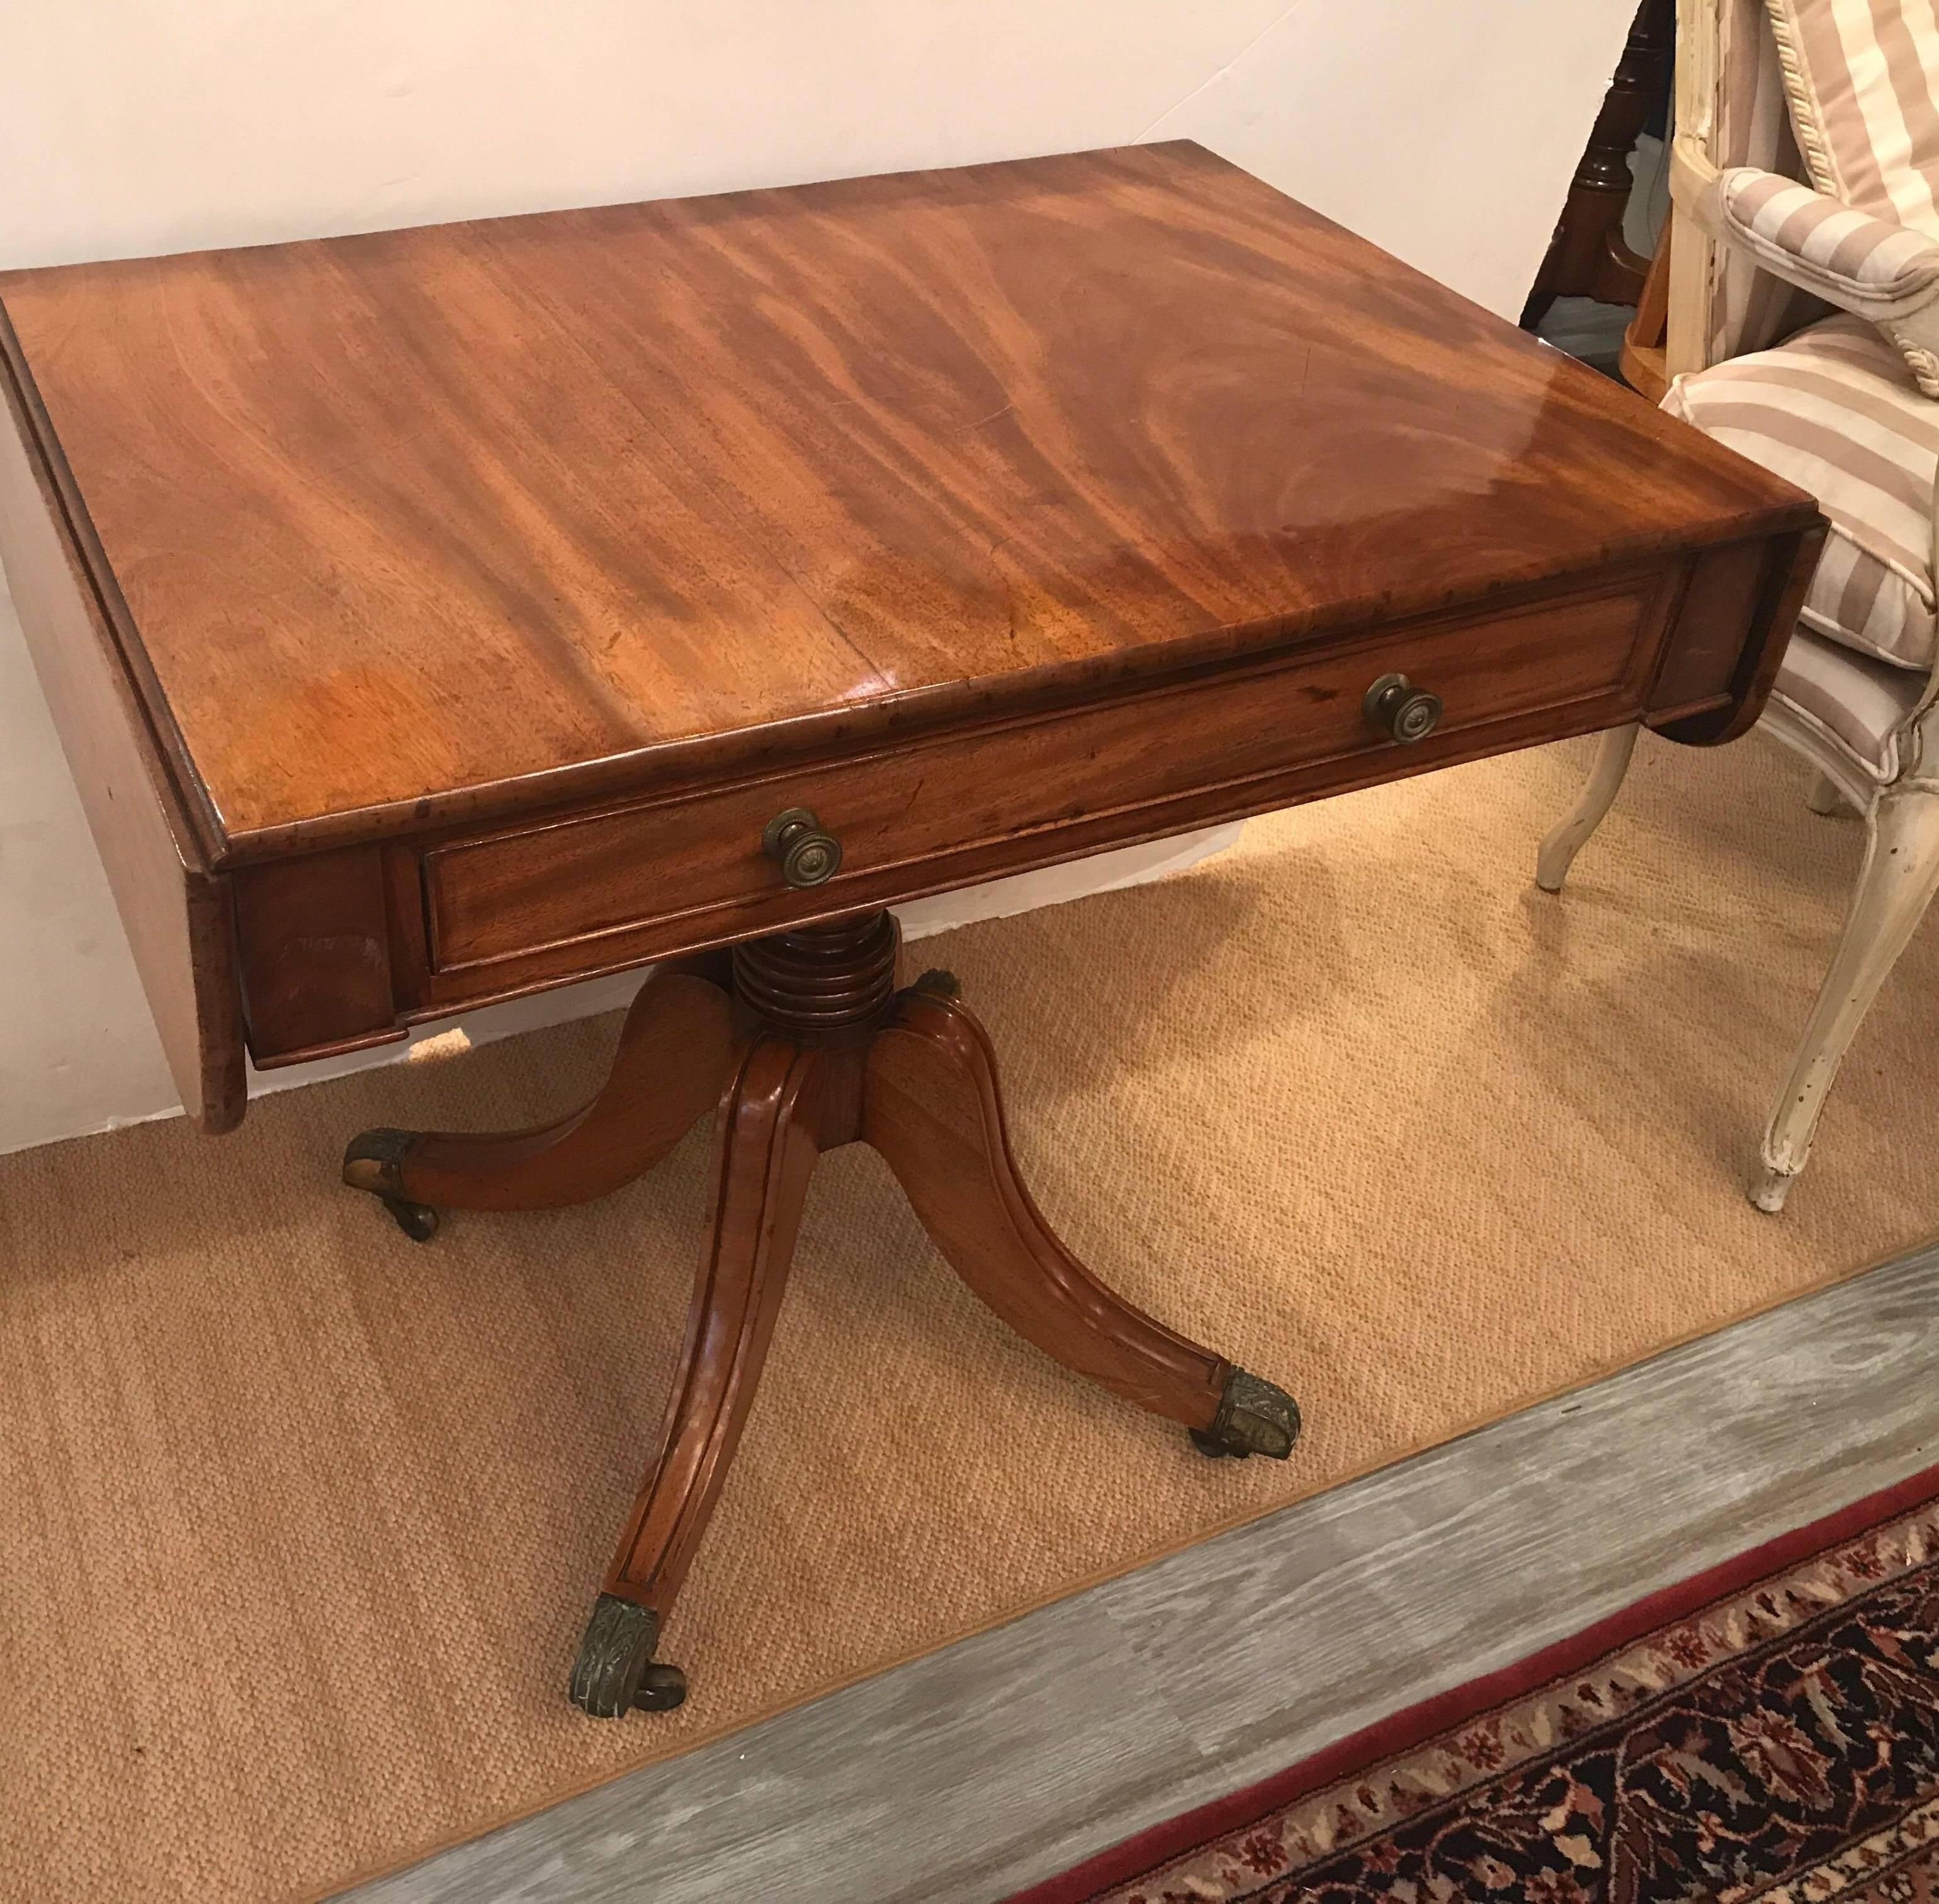 Classic drop-leaf mahogany sofa table writing desk. The single drawer with a duplicate faux drawer on the back. The recent French polish enhances the nicely figured grain of the wood. The leaves add 6 inches to each side. Overall length with the